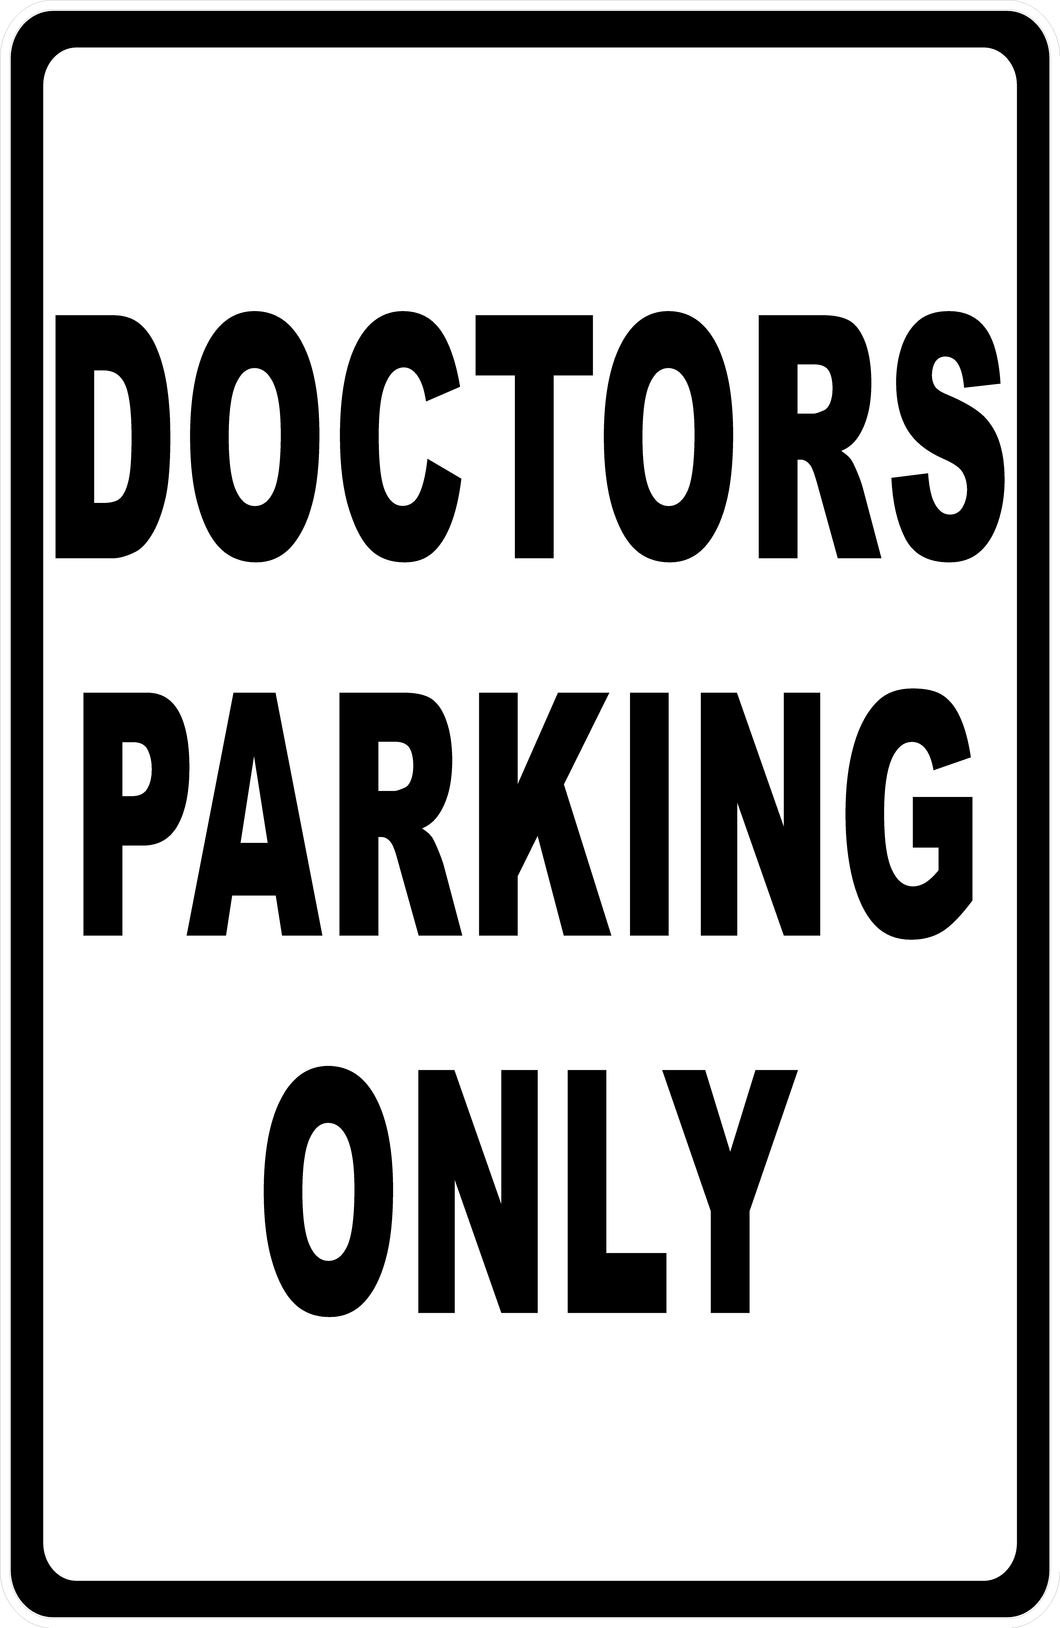 Doctors Parking Only Sign